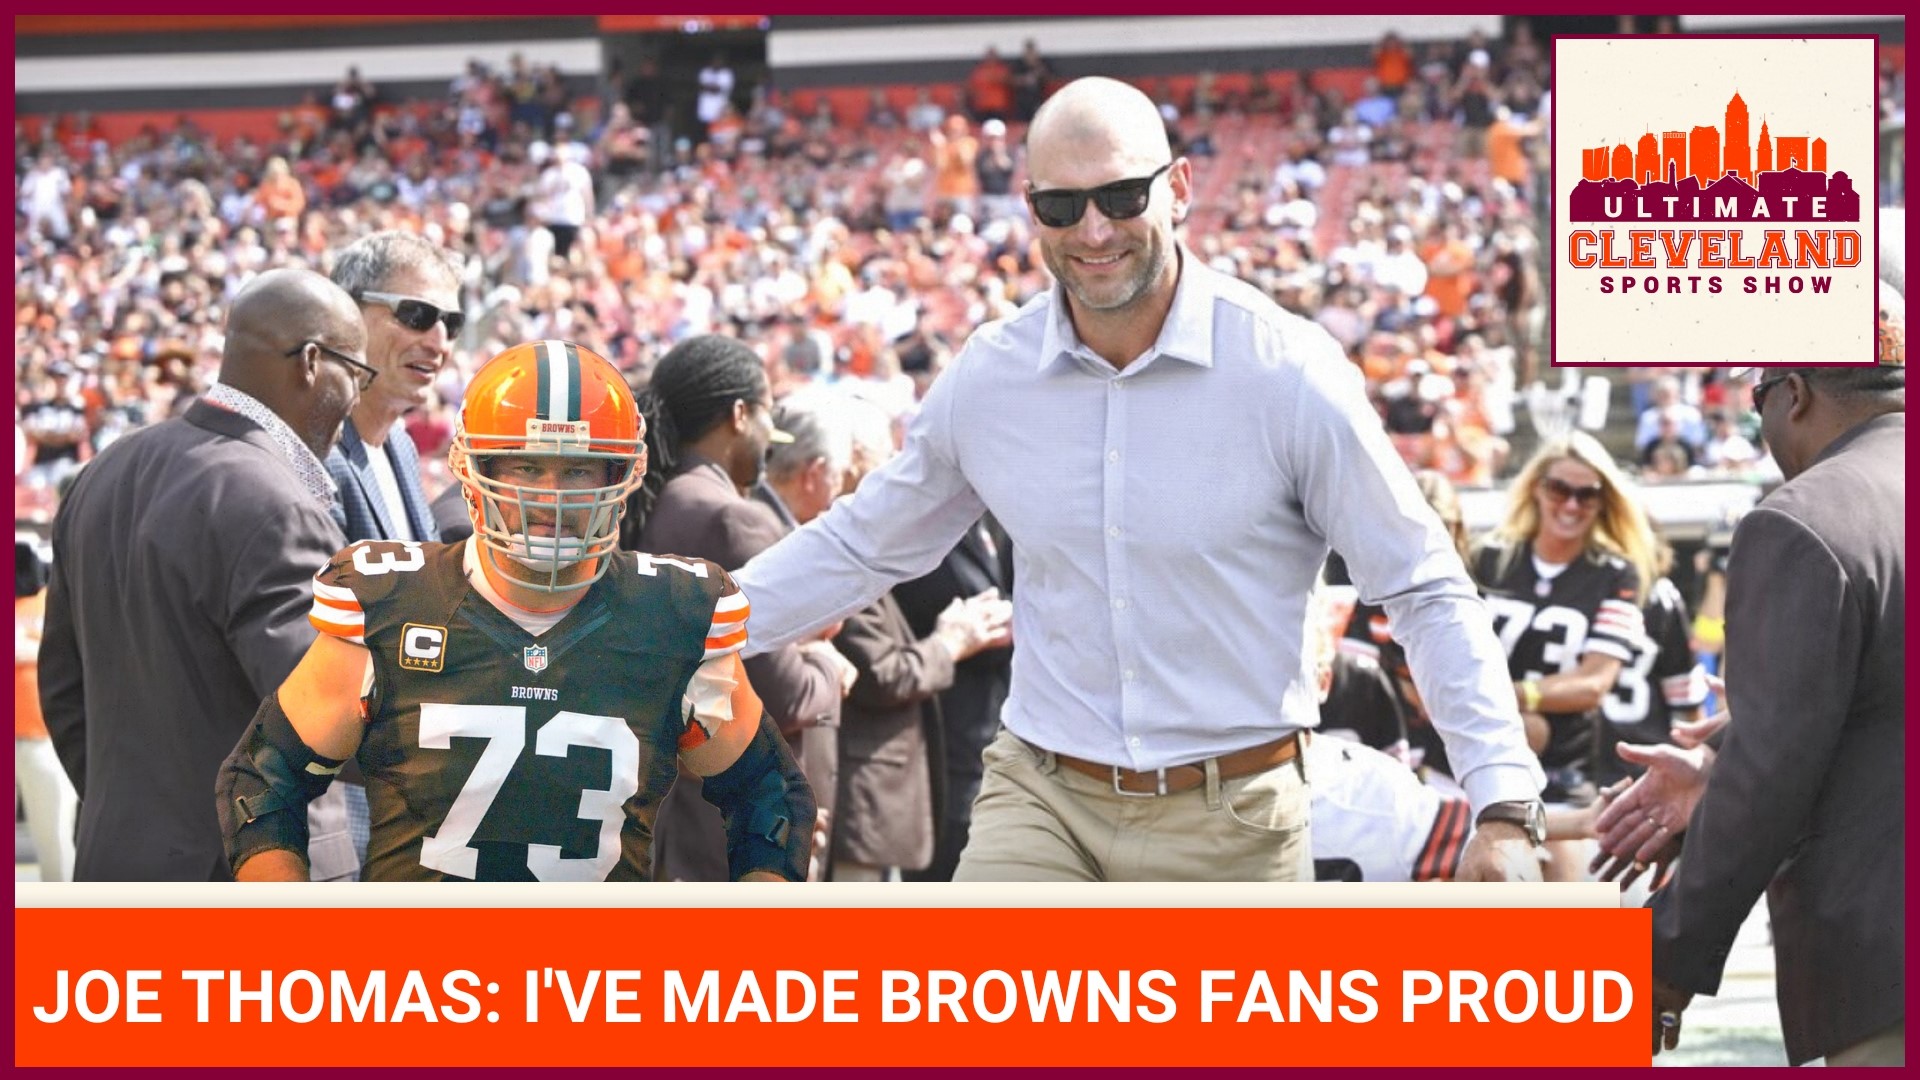 Joe Thomas joins UCSS and talks about how his making the HOF makes him happy he's made Browns' fans proud.